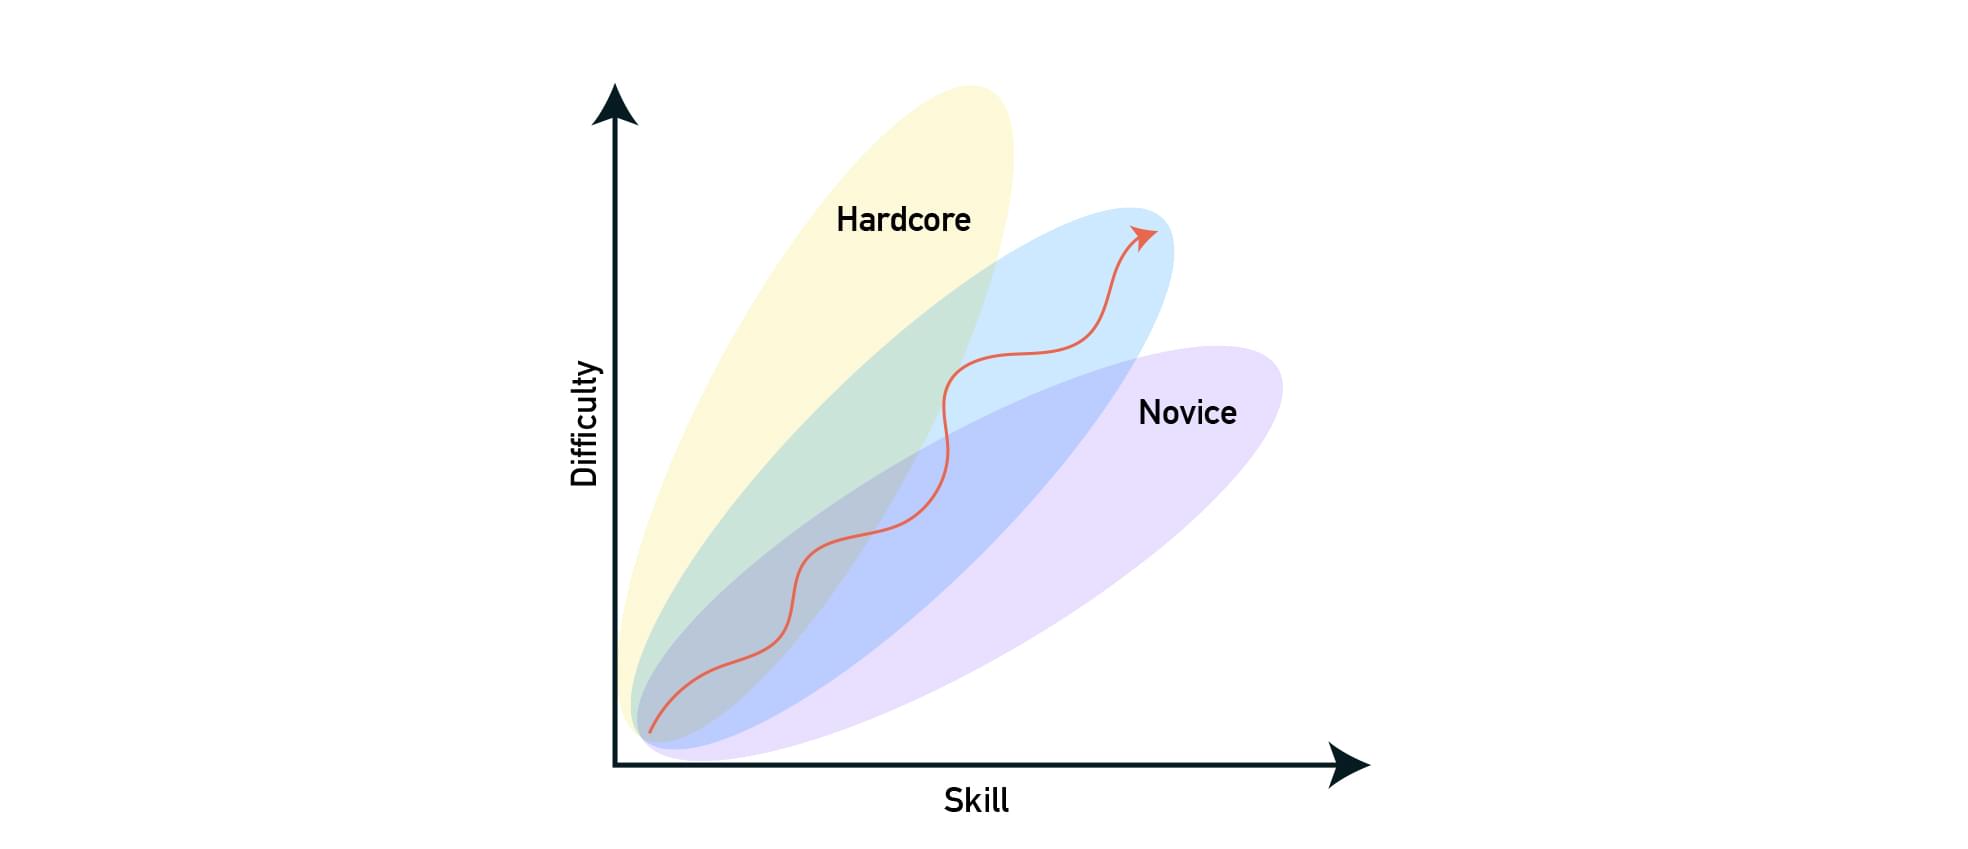 The flow zone is different depending on the skill level of the player